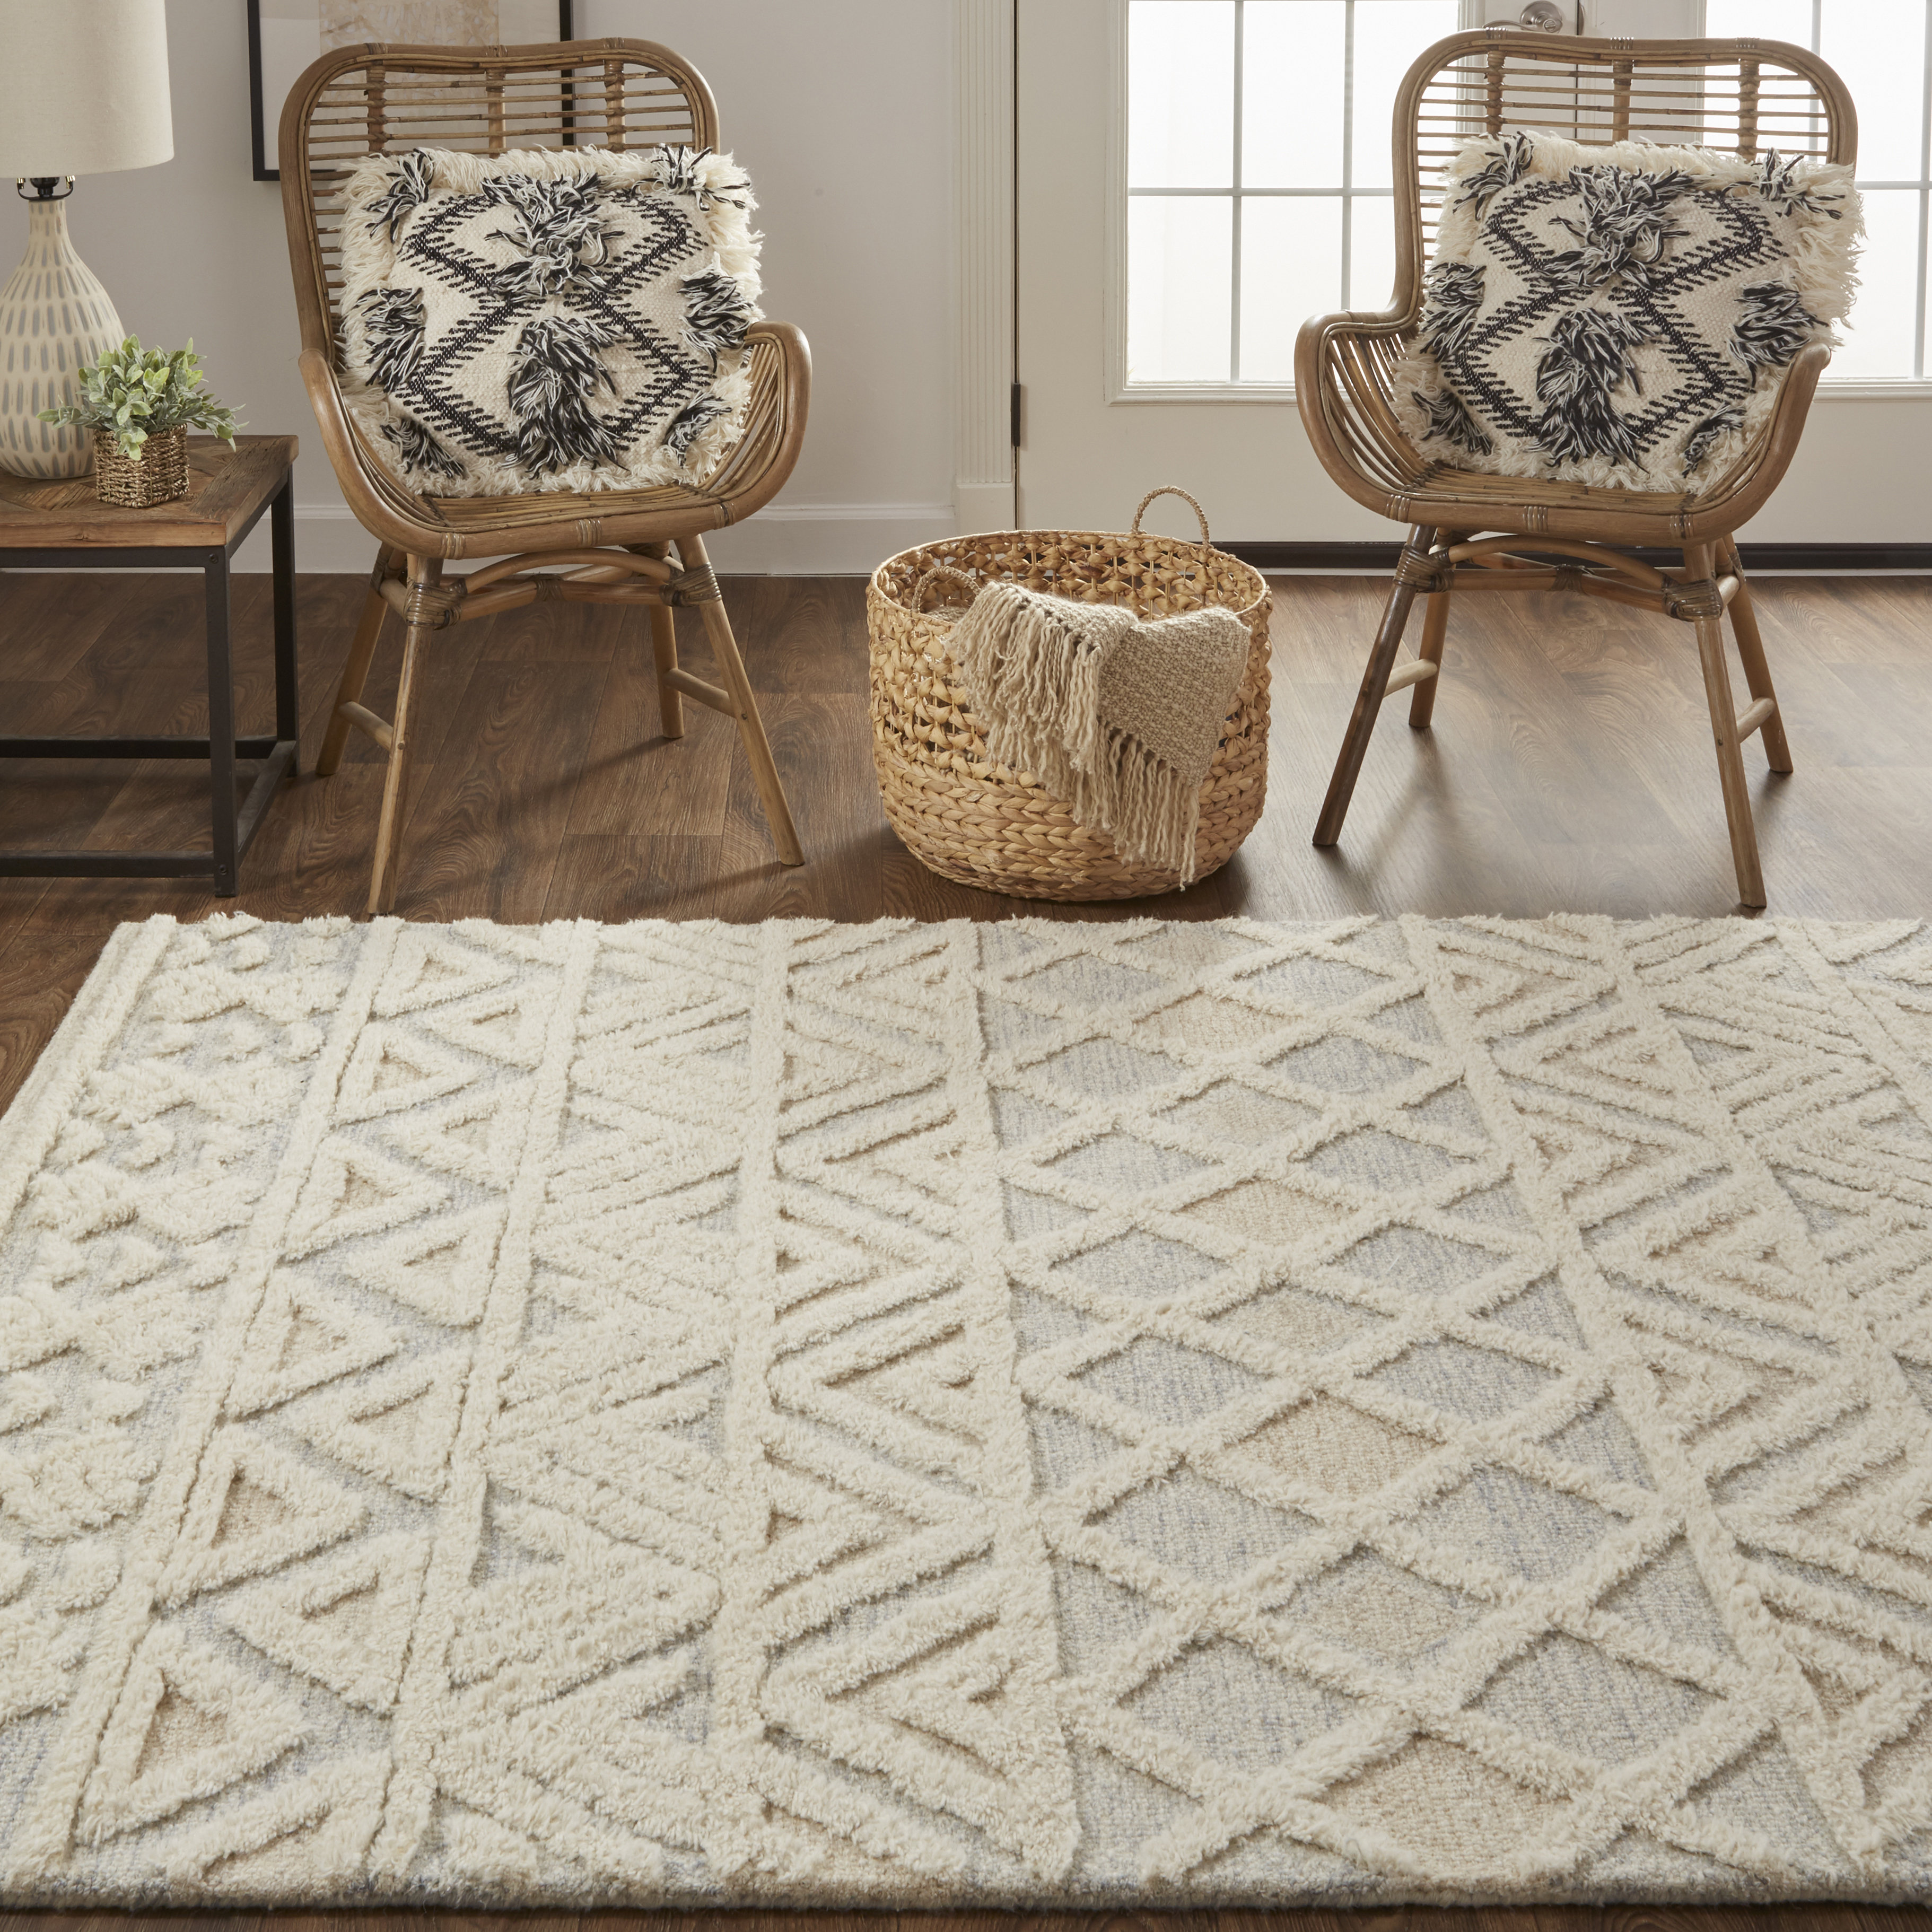 The Tufted Rug is Trending